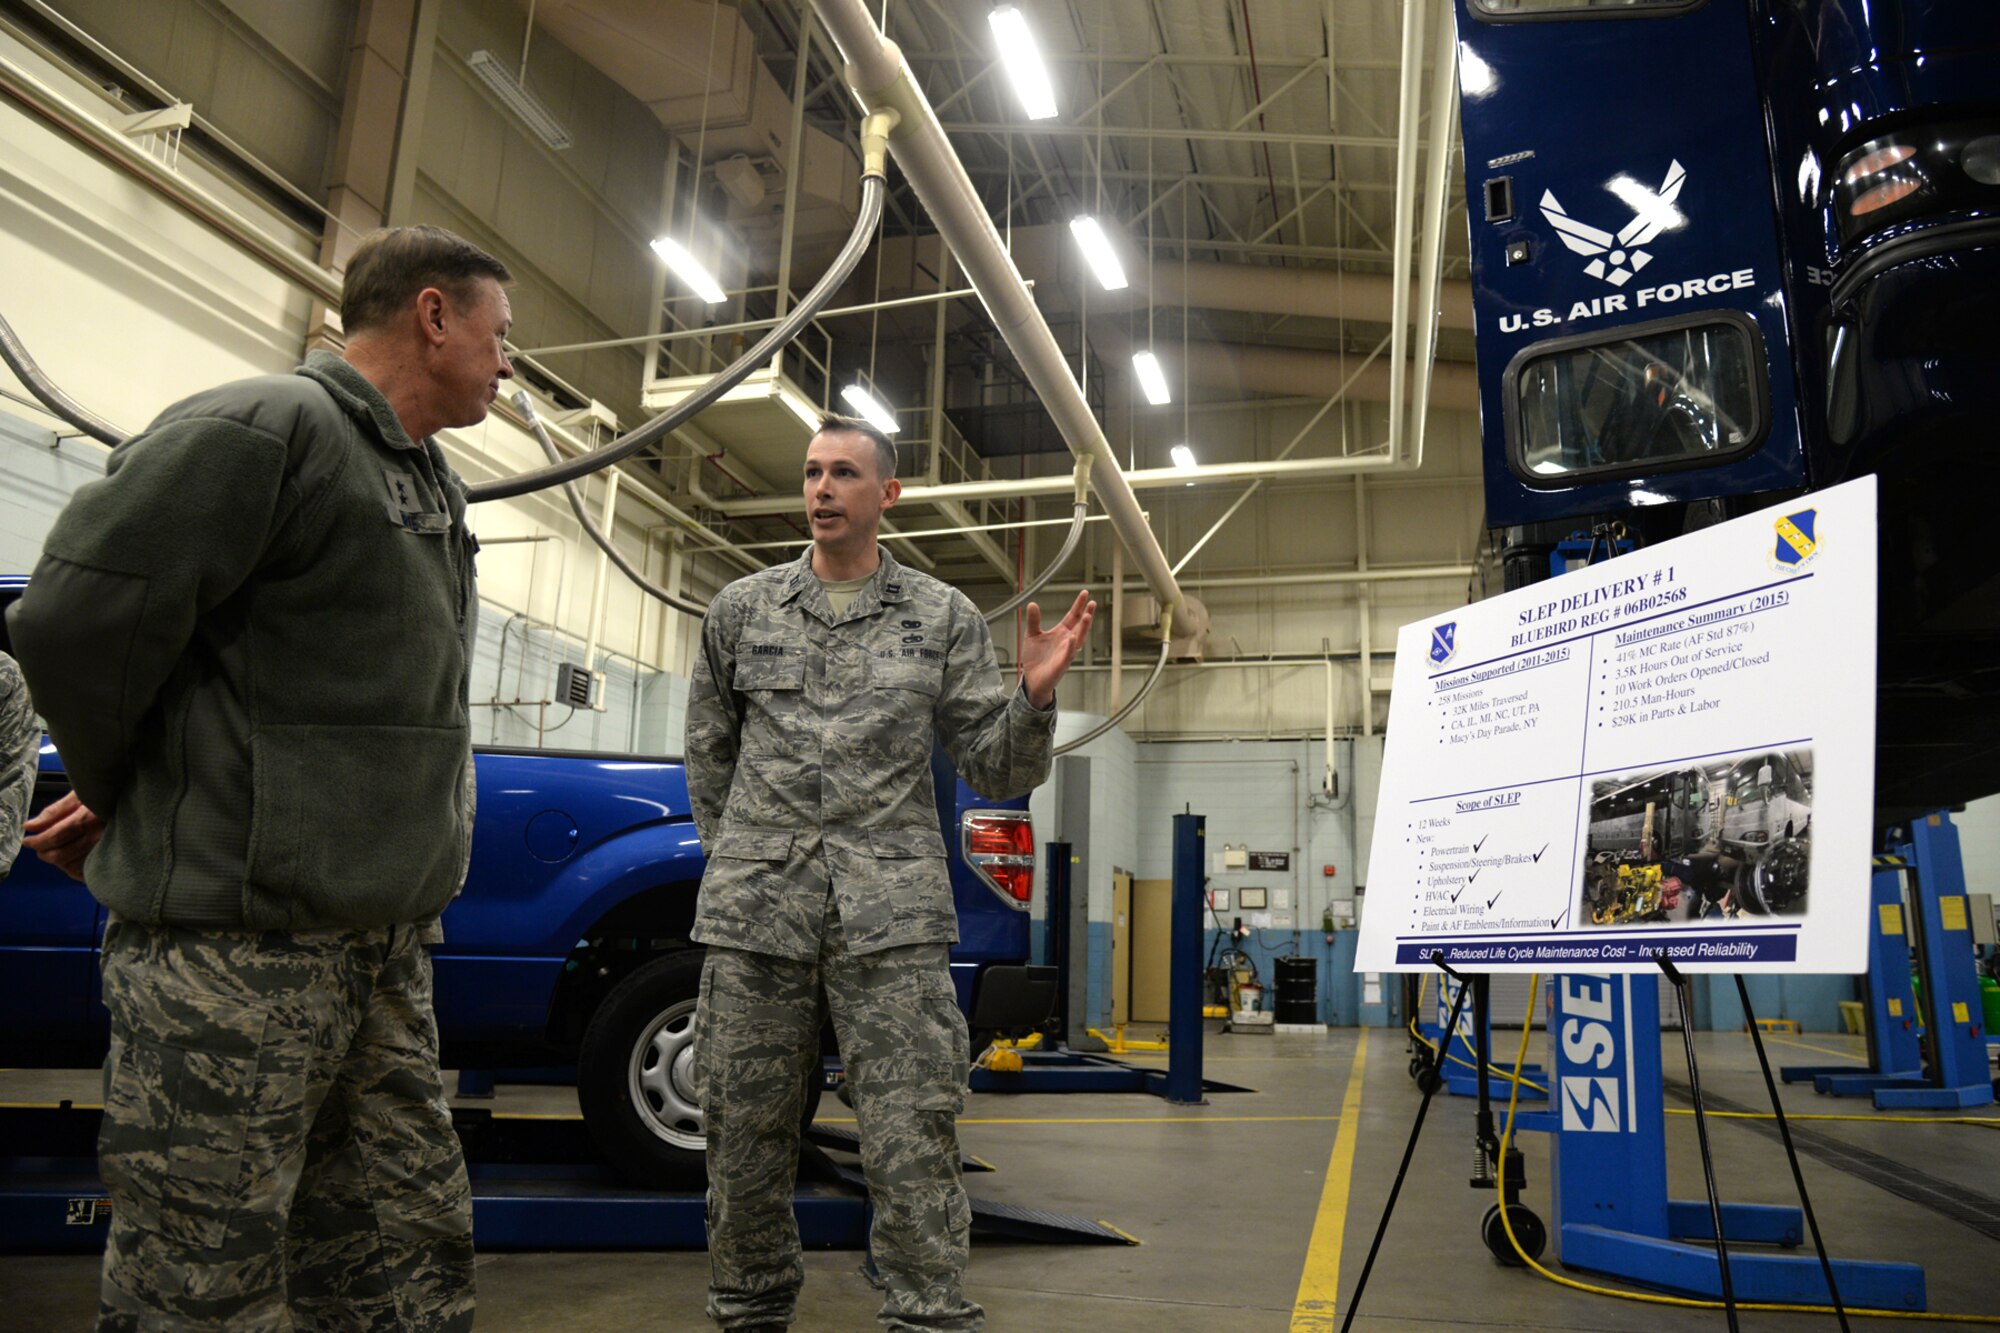 Capt. David Garcia, 11th Logistics Readiness Squadron, briefs Air Force District of Washington Commander Maj. Gen. Darryl Burke on Service Life Enhancement Program upgrades to the Coach Bus fleet on Joint Base Andrews, Md., Feb. 23, 2016. AFDW partnered with the 11th LRS to ensure funding was available to repair the buses that provide transportation for the Air Force Band and Honor Guard. (U.S. Air force photo/Tech. Sgt. Matt Davis)